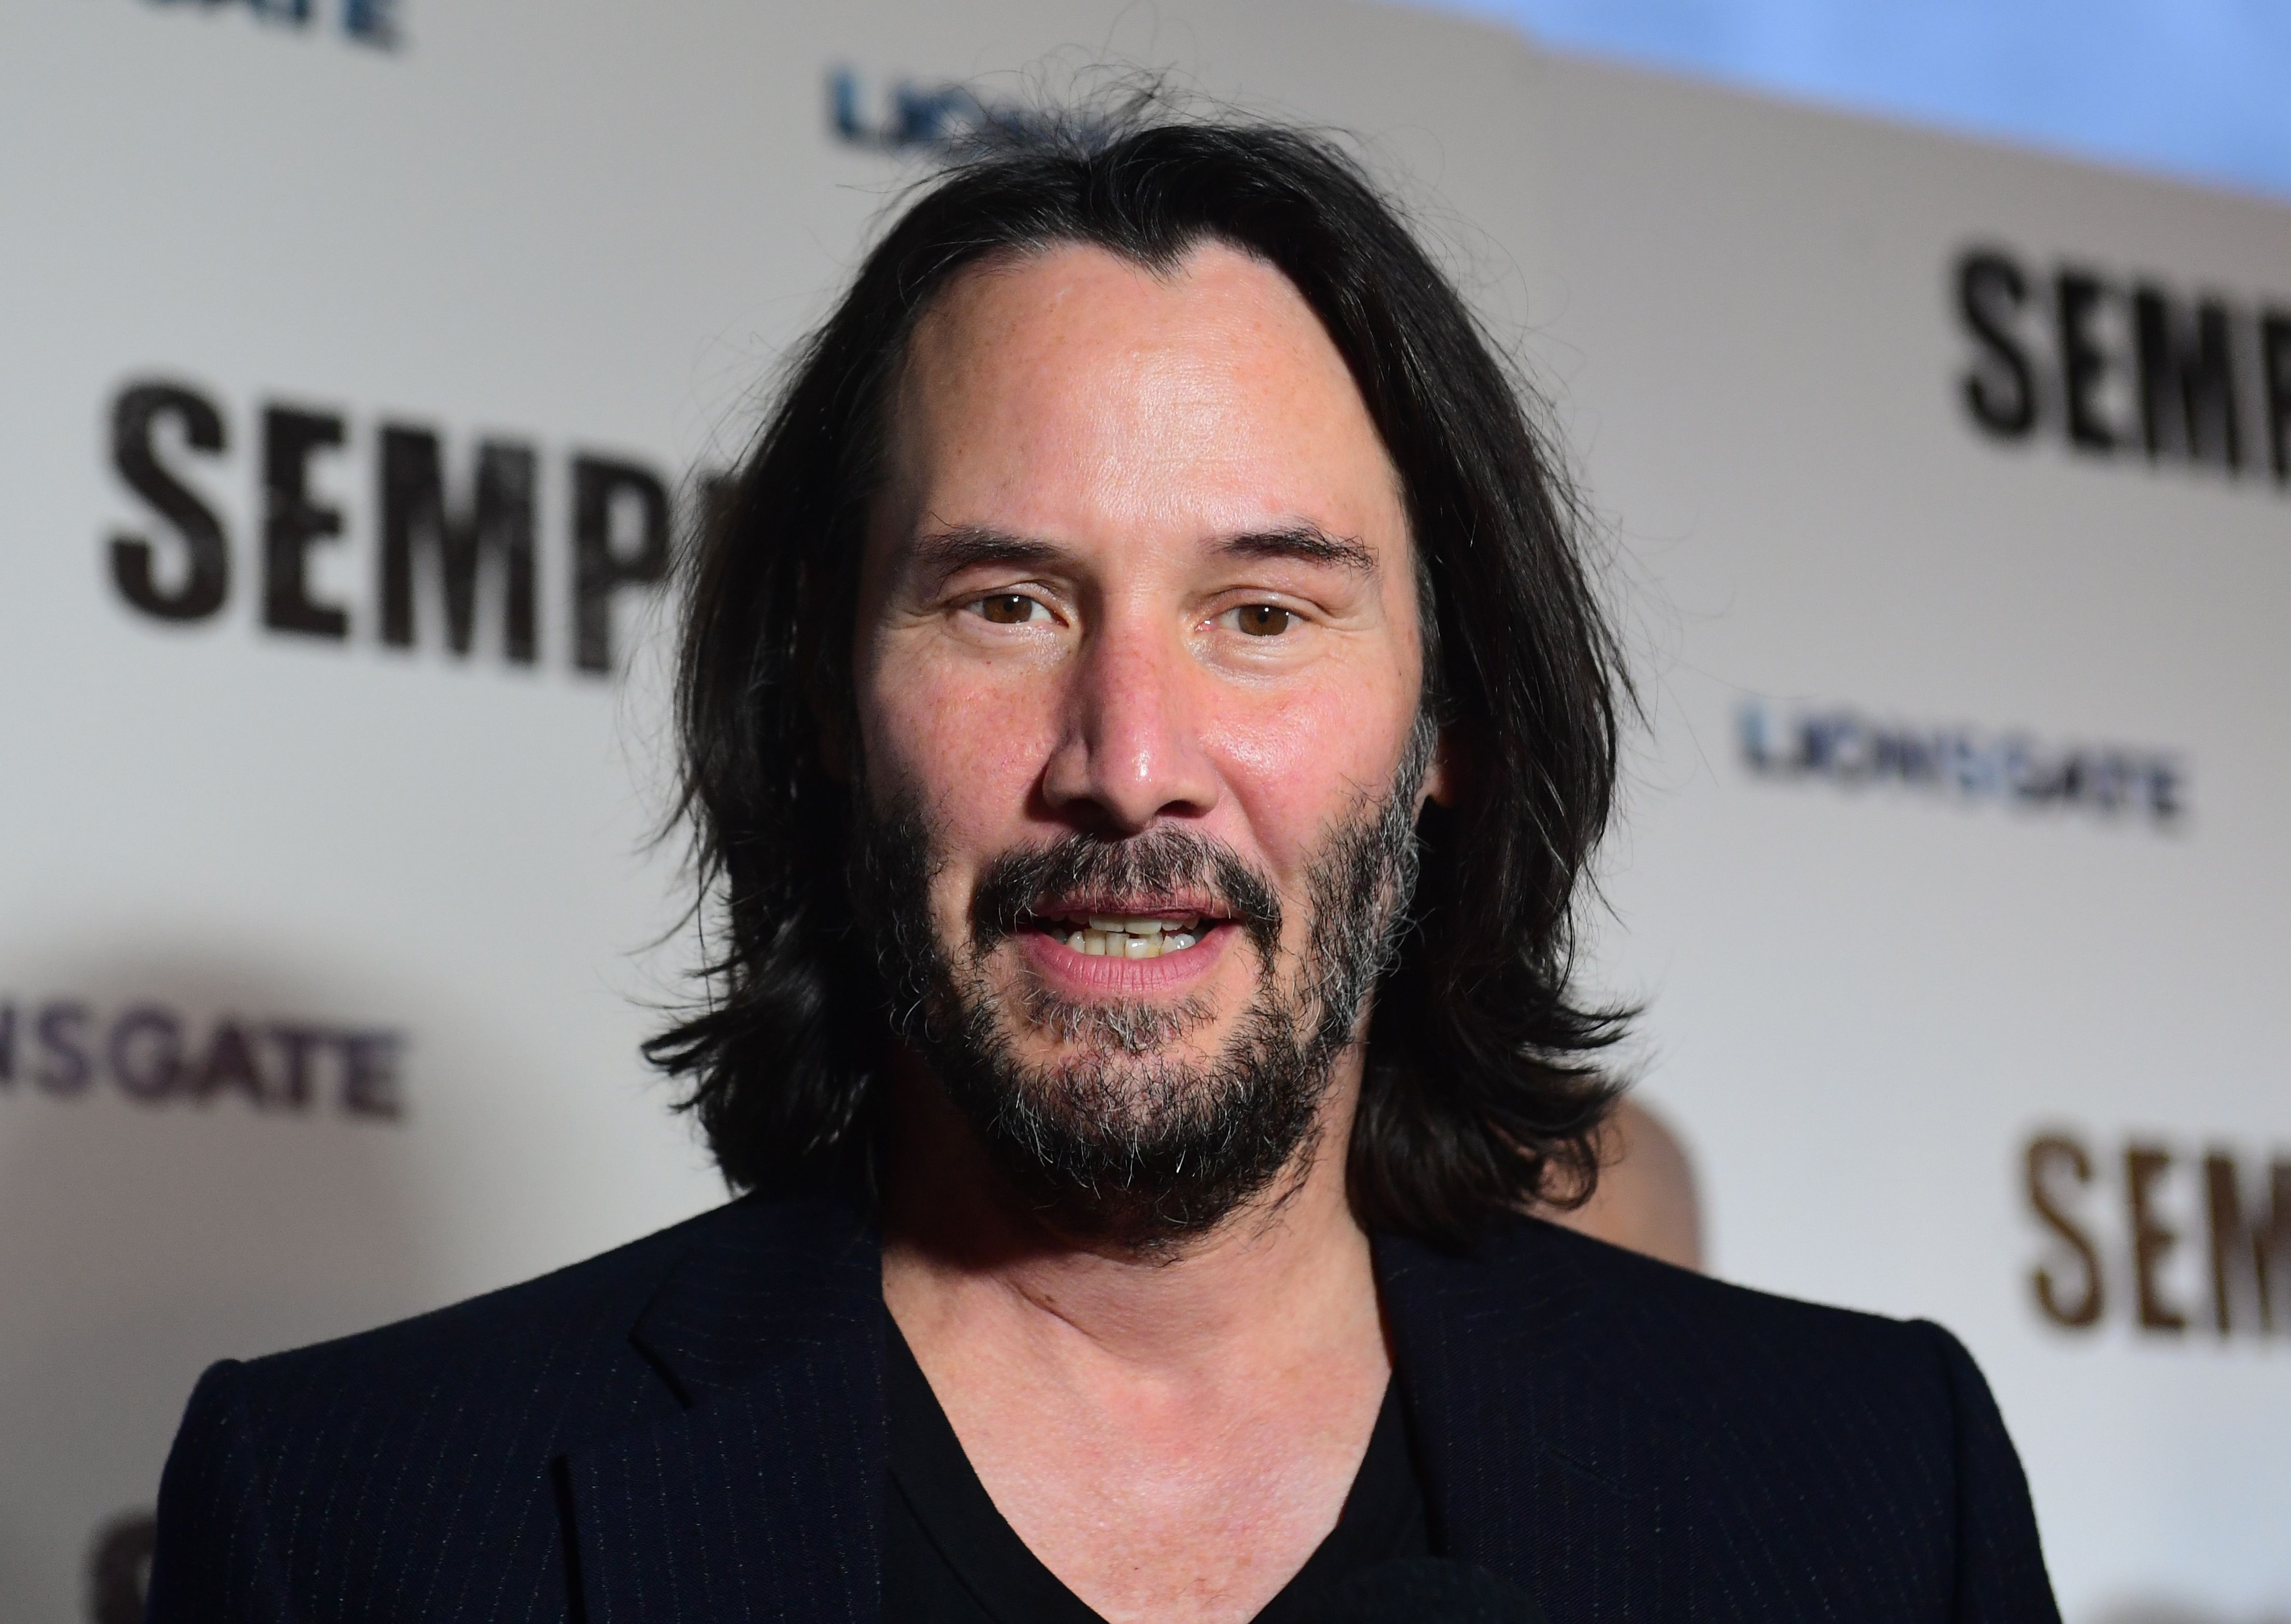 Speed star Keanu Reeves on the red carpet for Semper Fi